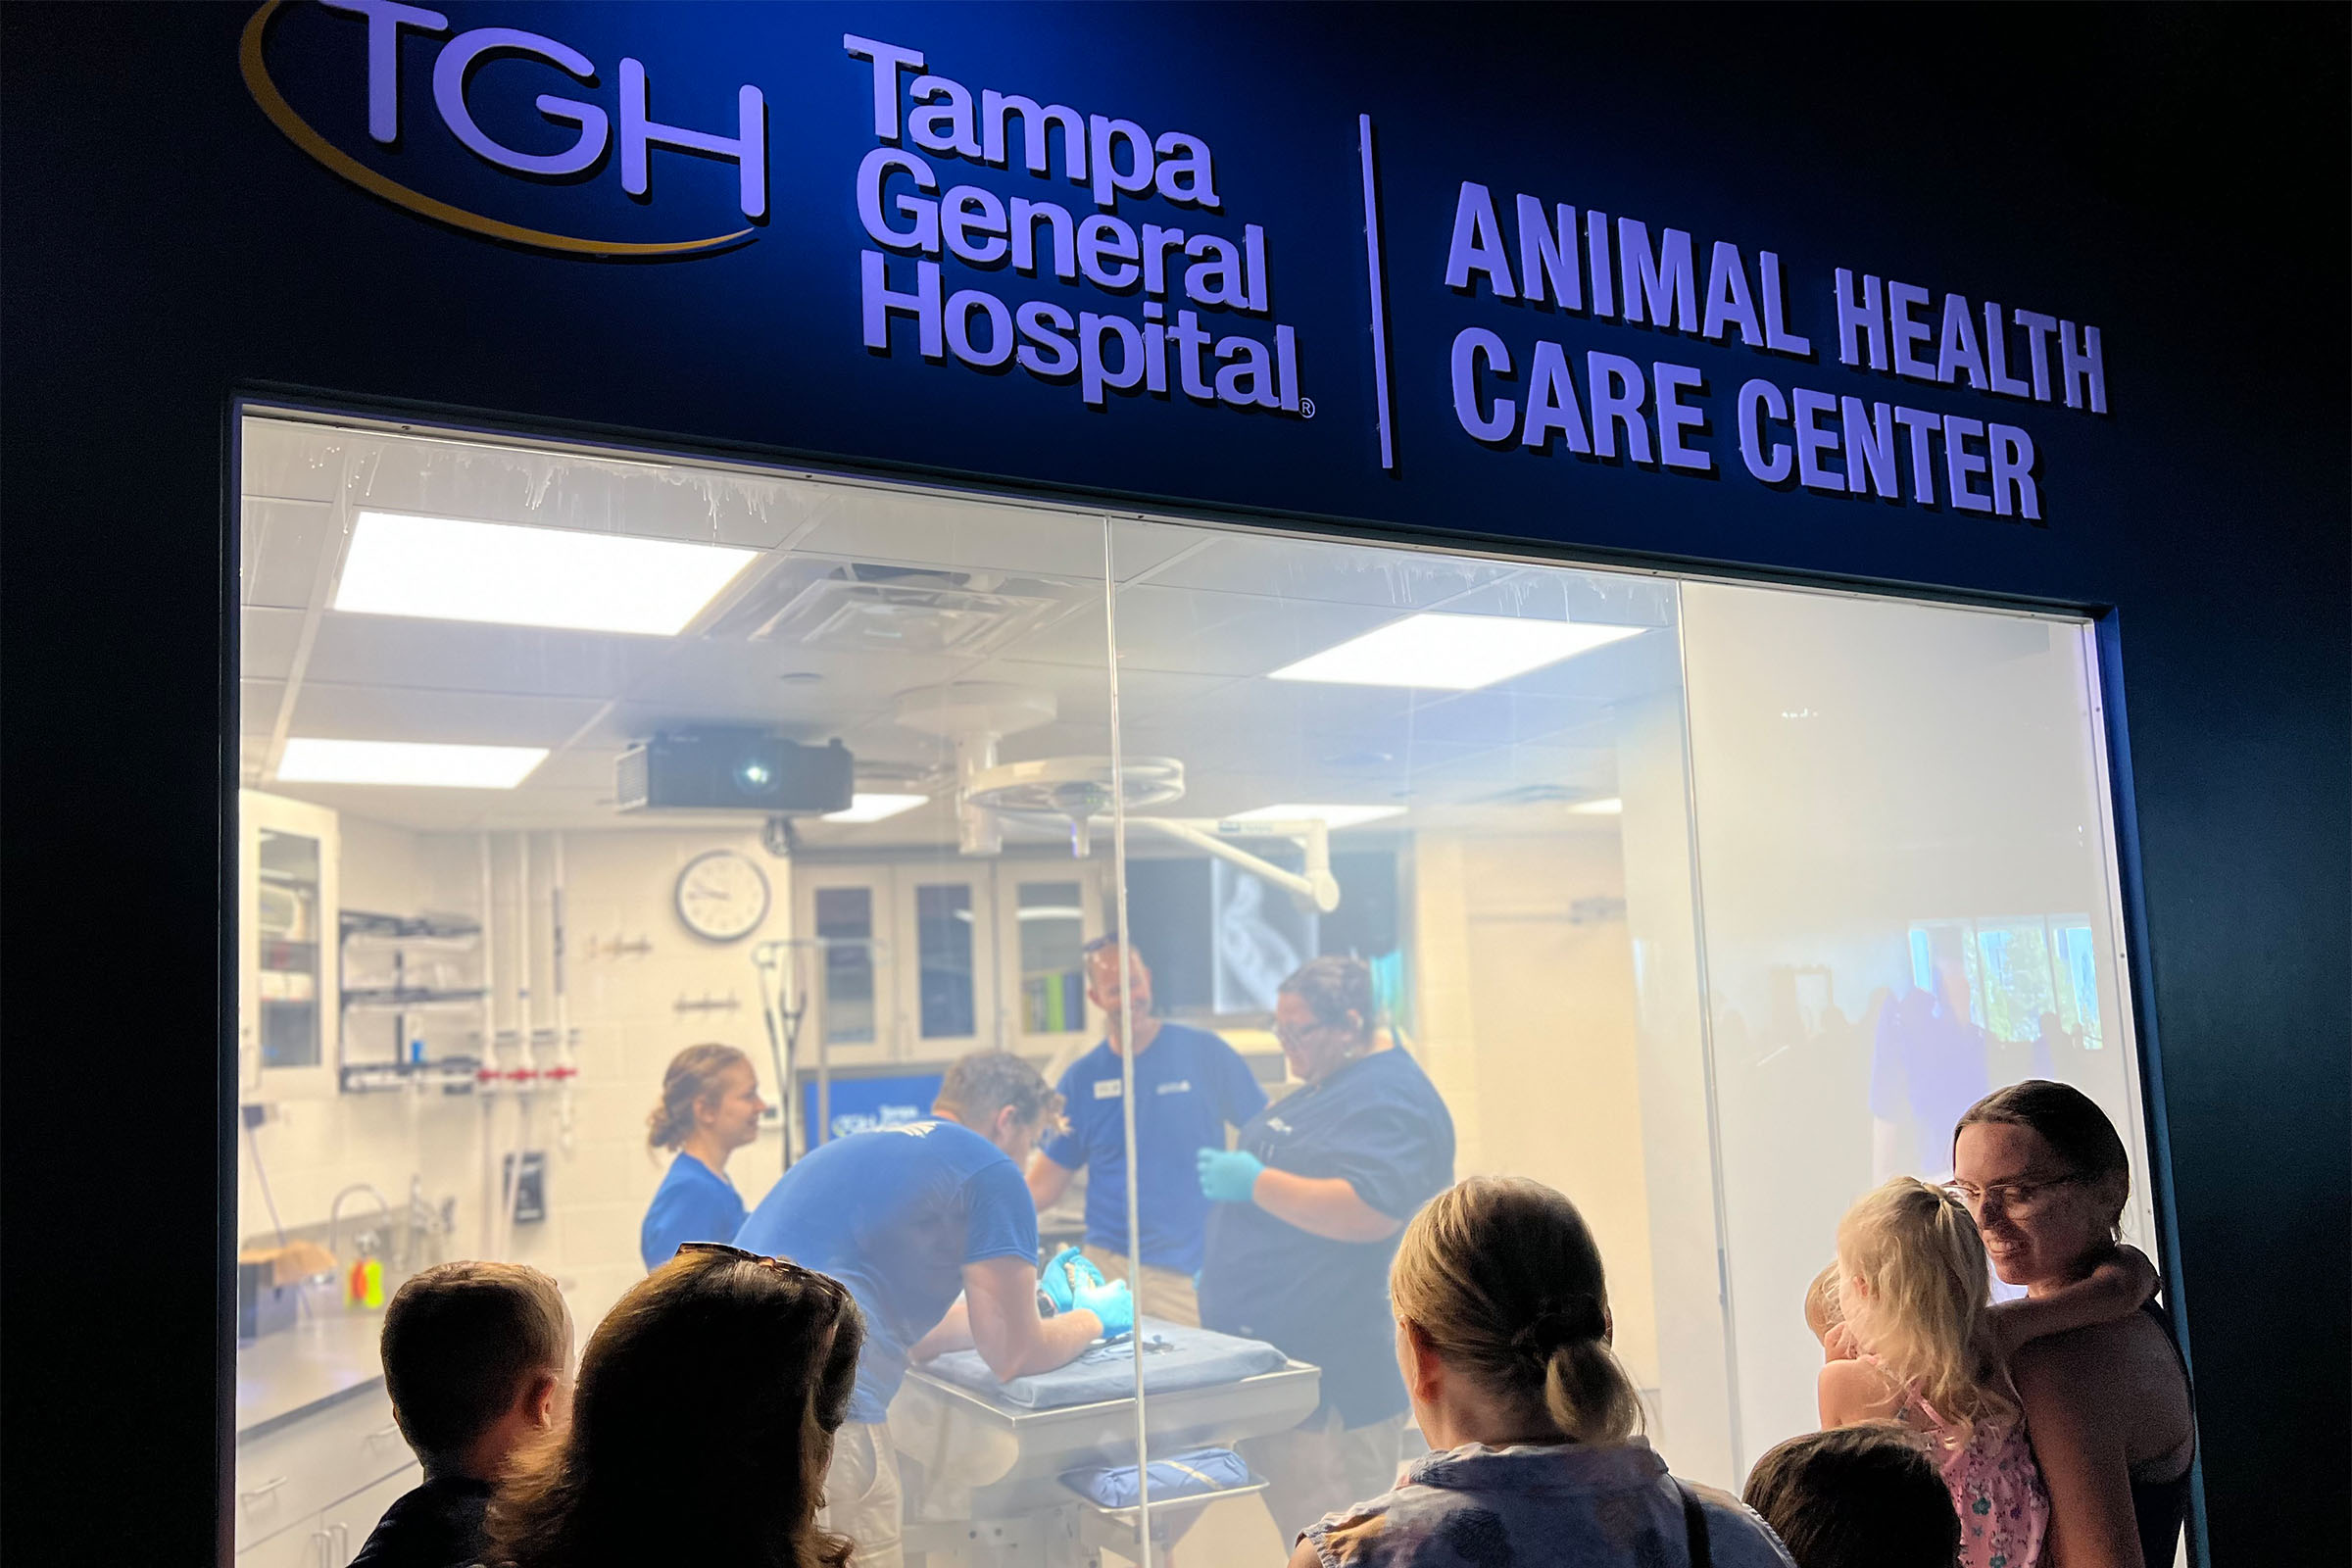 guests watching vets at The Florida Aquarium give an exam to an animal in the Tampa General Hospital Animal Health Care Center